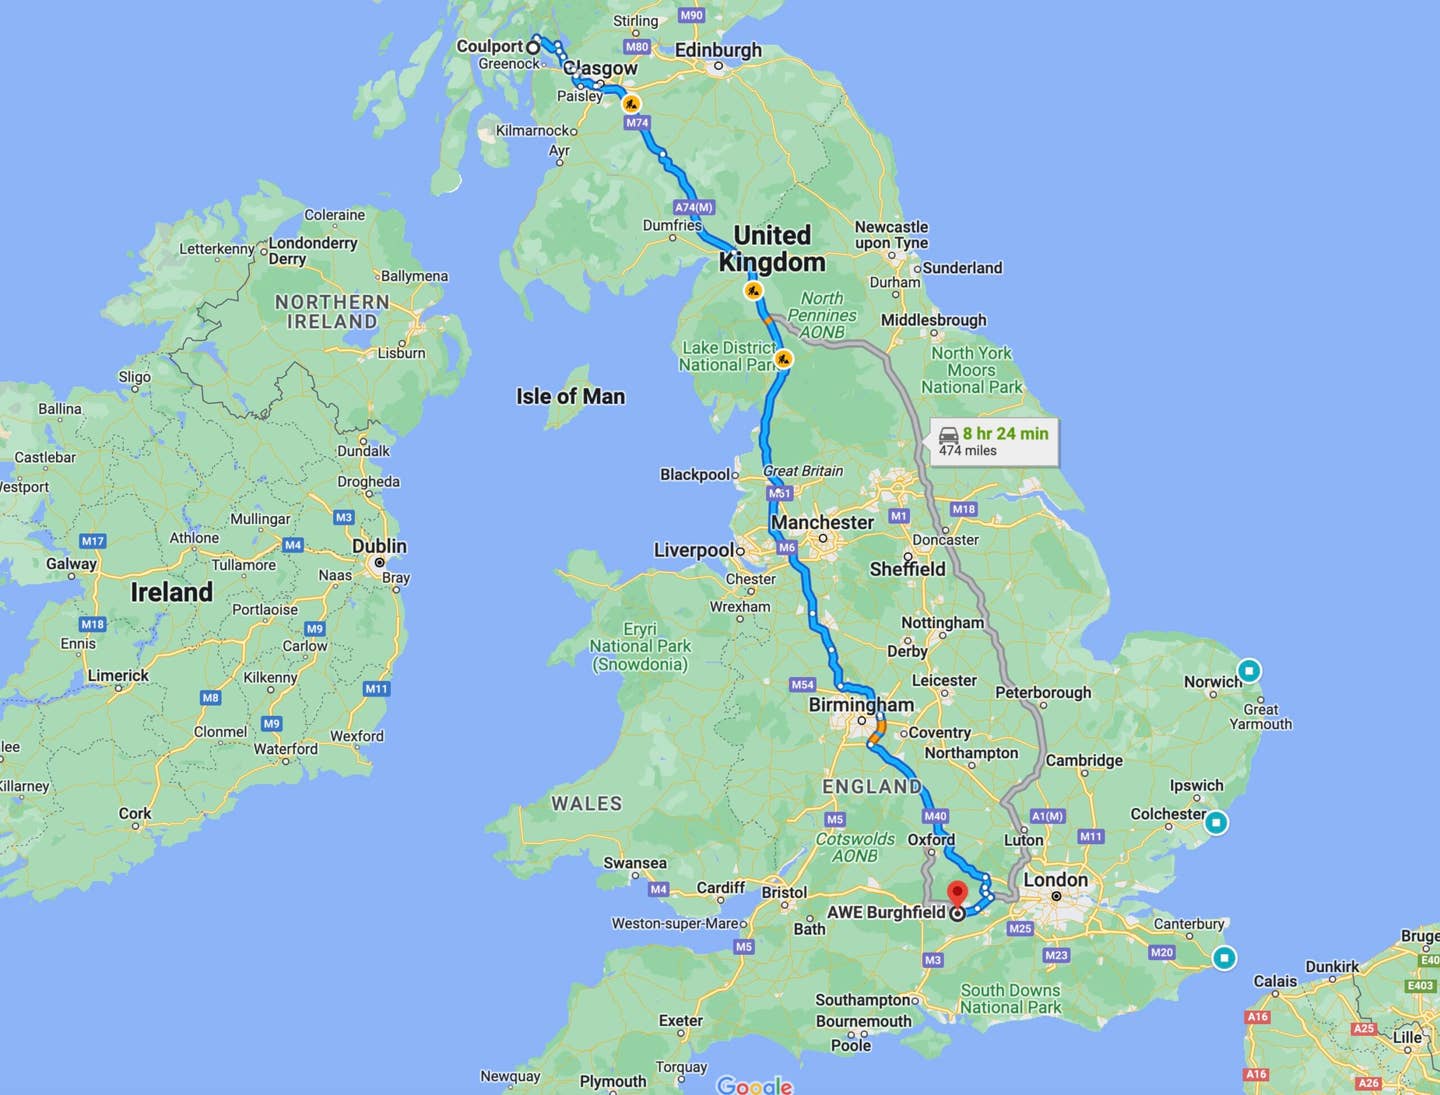 Typical route from AWE Burghfield in England to RNAD Coulport in Scotland. <em>Google Maps</em>